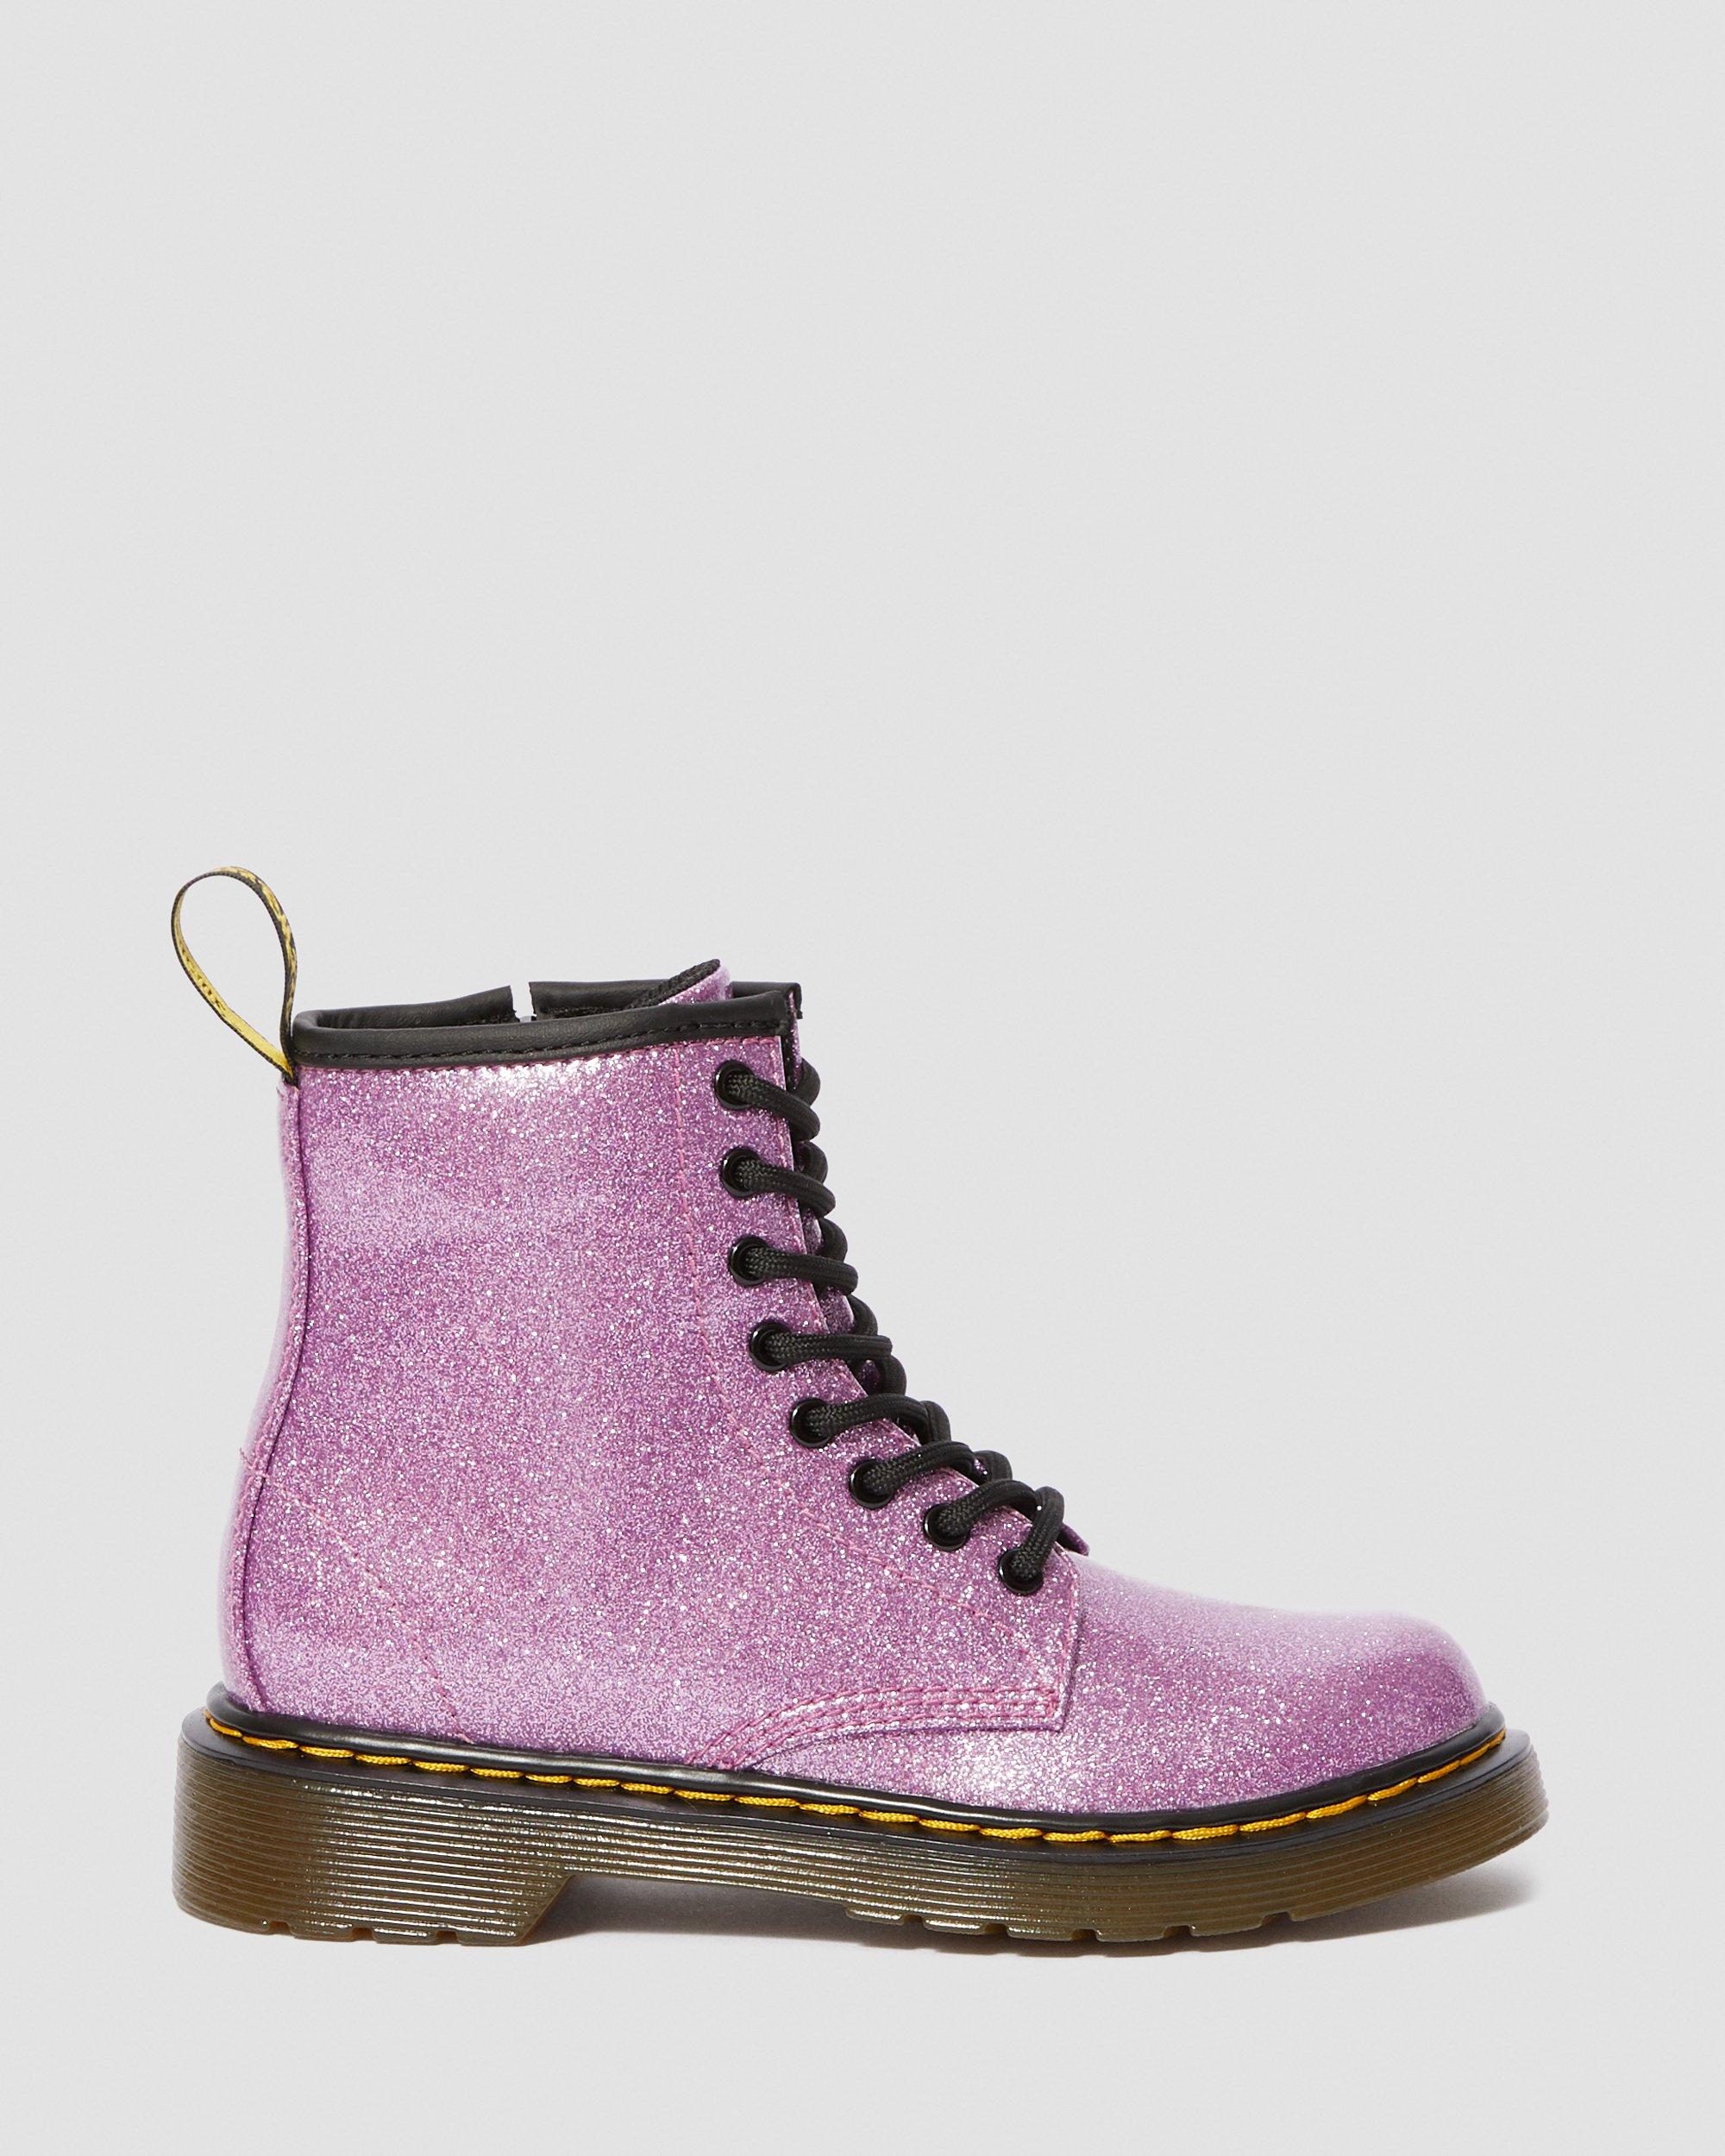 Glitter Martens Up Junior Dark | Dr. Pink Boots 1460 Lace in